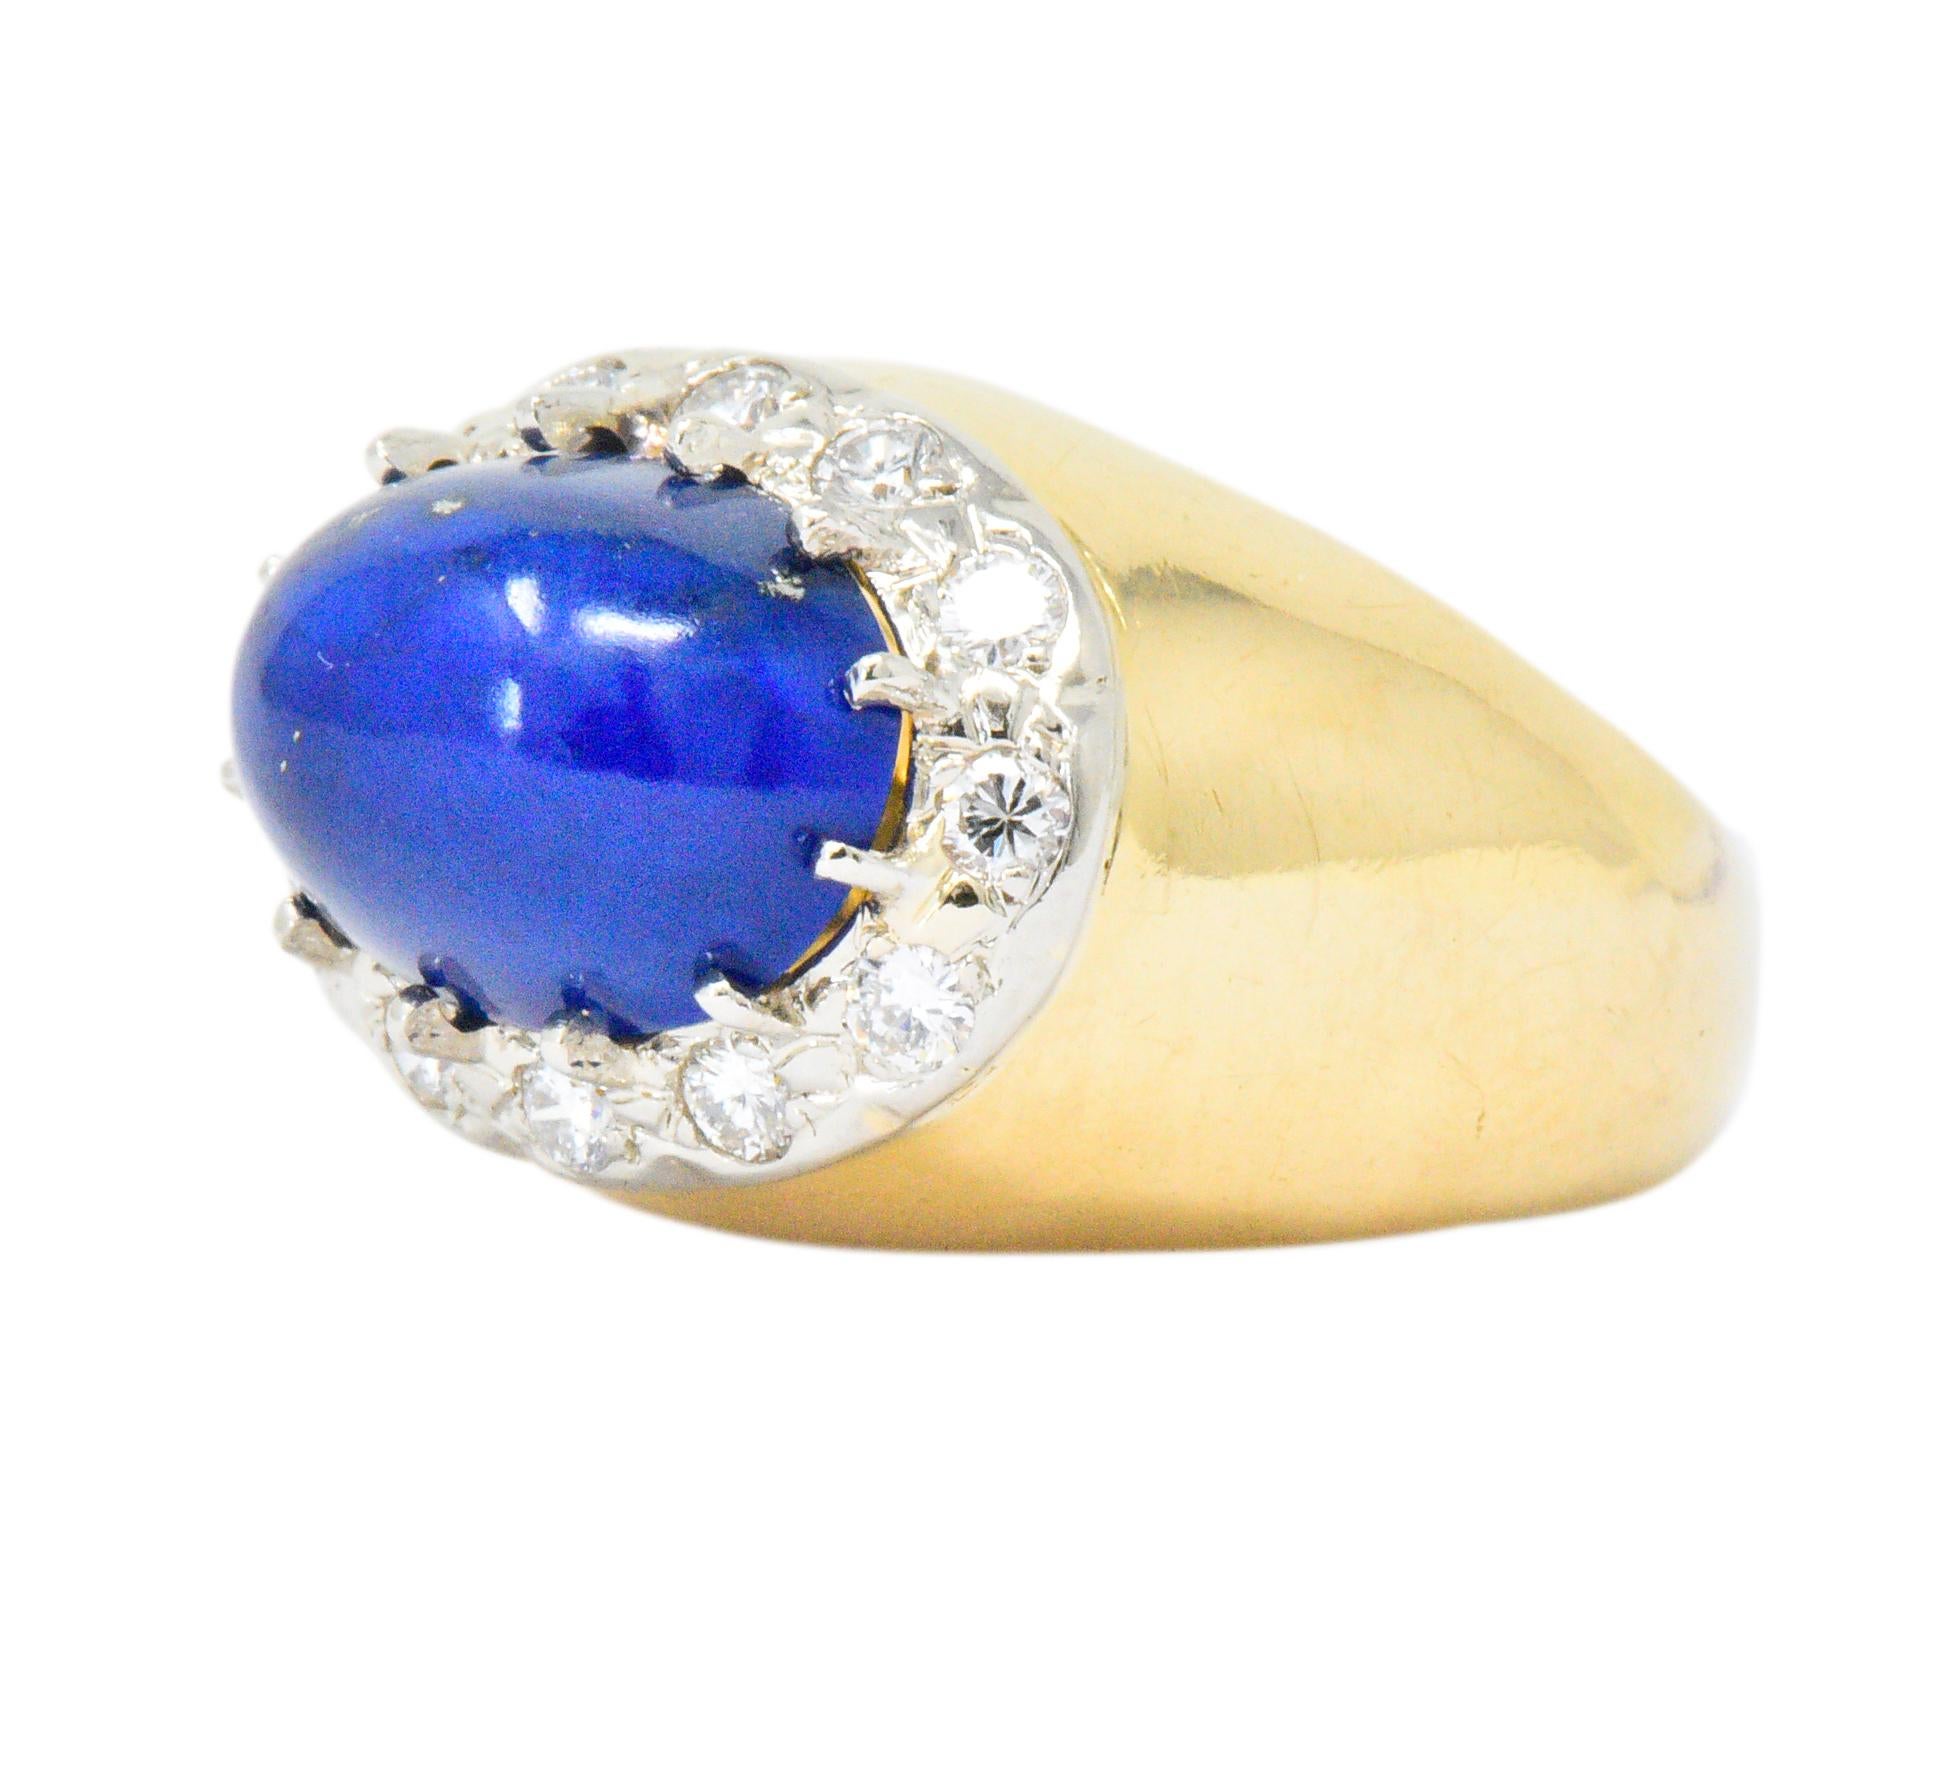 Centering an oval cabochon lapis lazuli measuring approximately 12.6 x  8.8 mm, rich royal blue with flecks of pyrite

With an 18 karat white gold surround containing twelve round brilliant cut diamonds weighing approximately 0.55 carat total, G